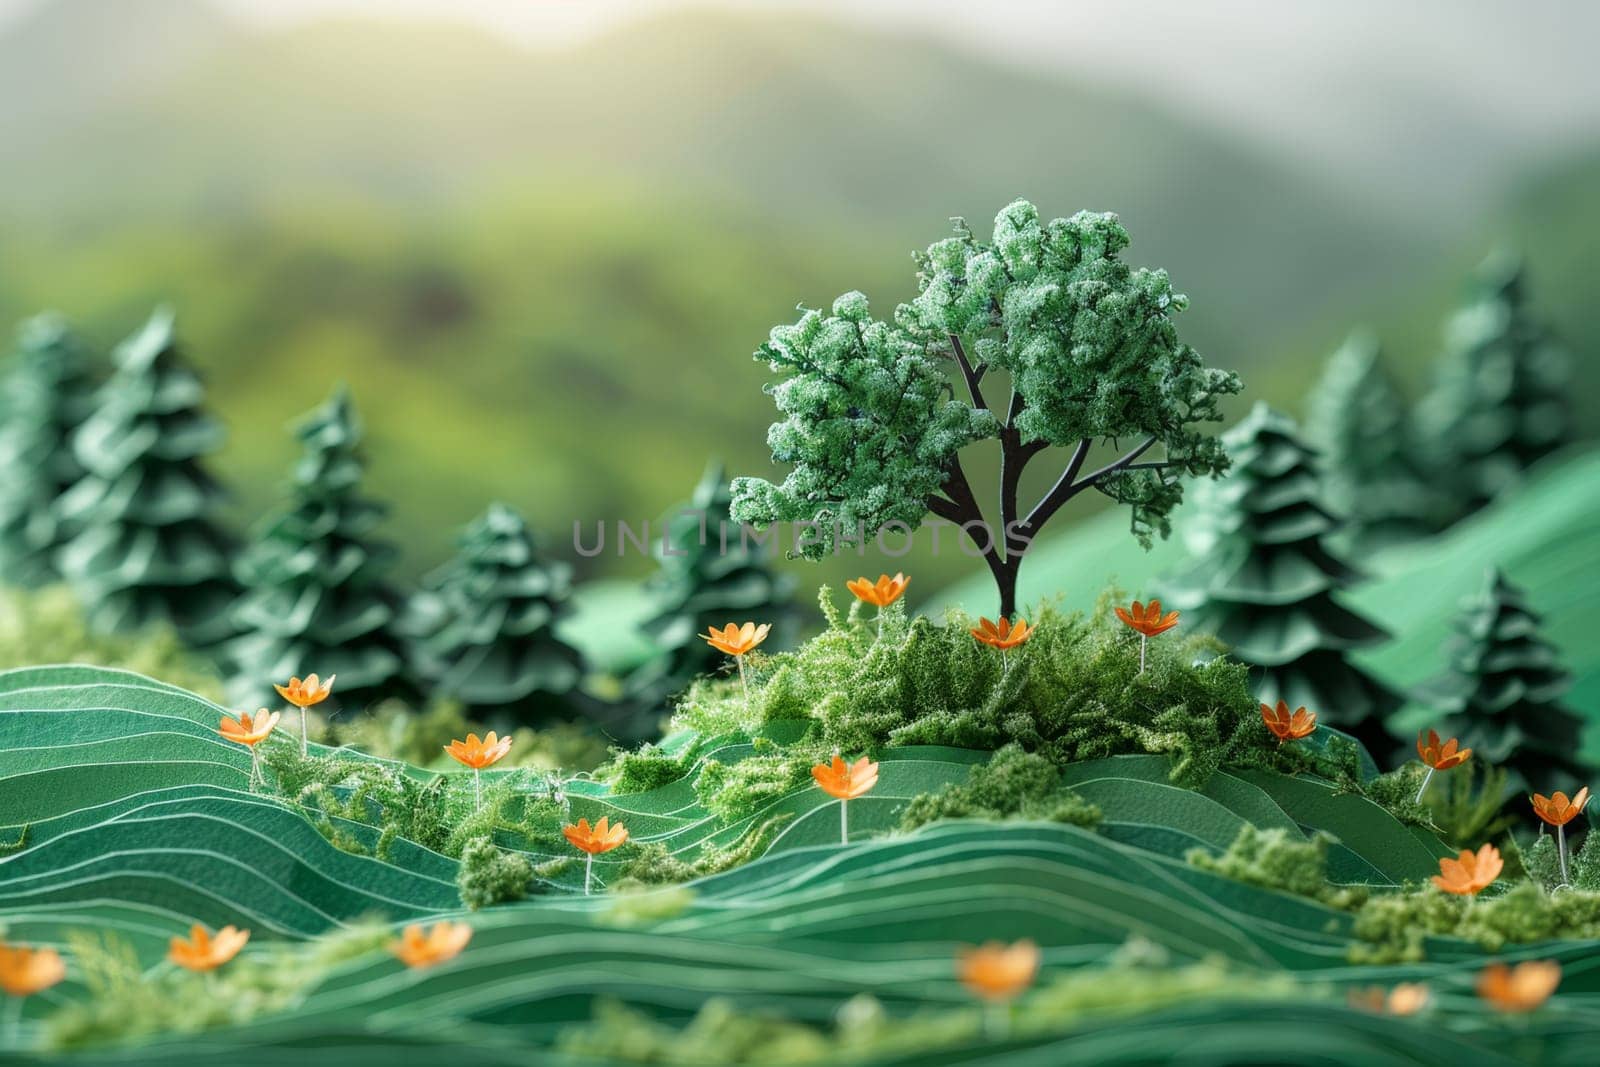 Environment. A natural landscape with green trees. World Environment Day by Lobachad